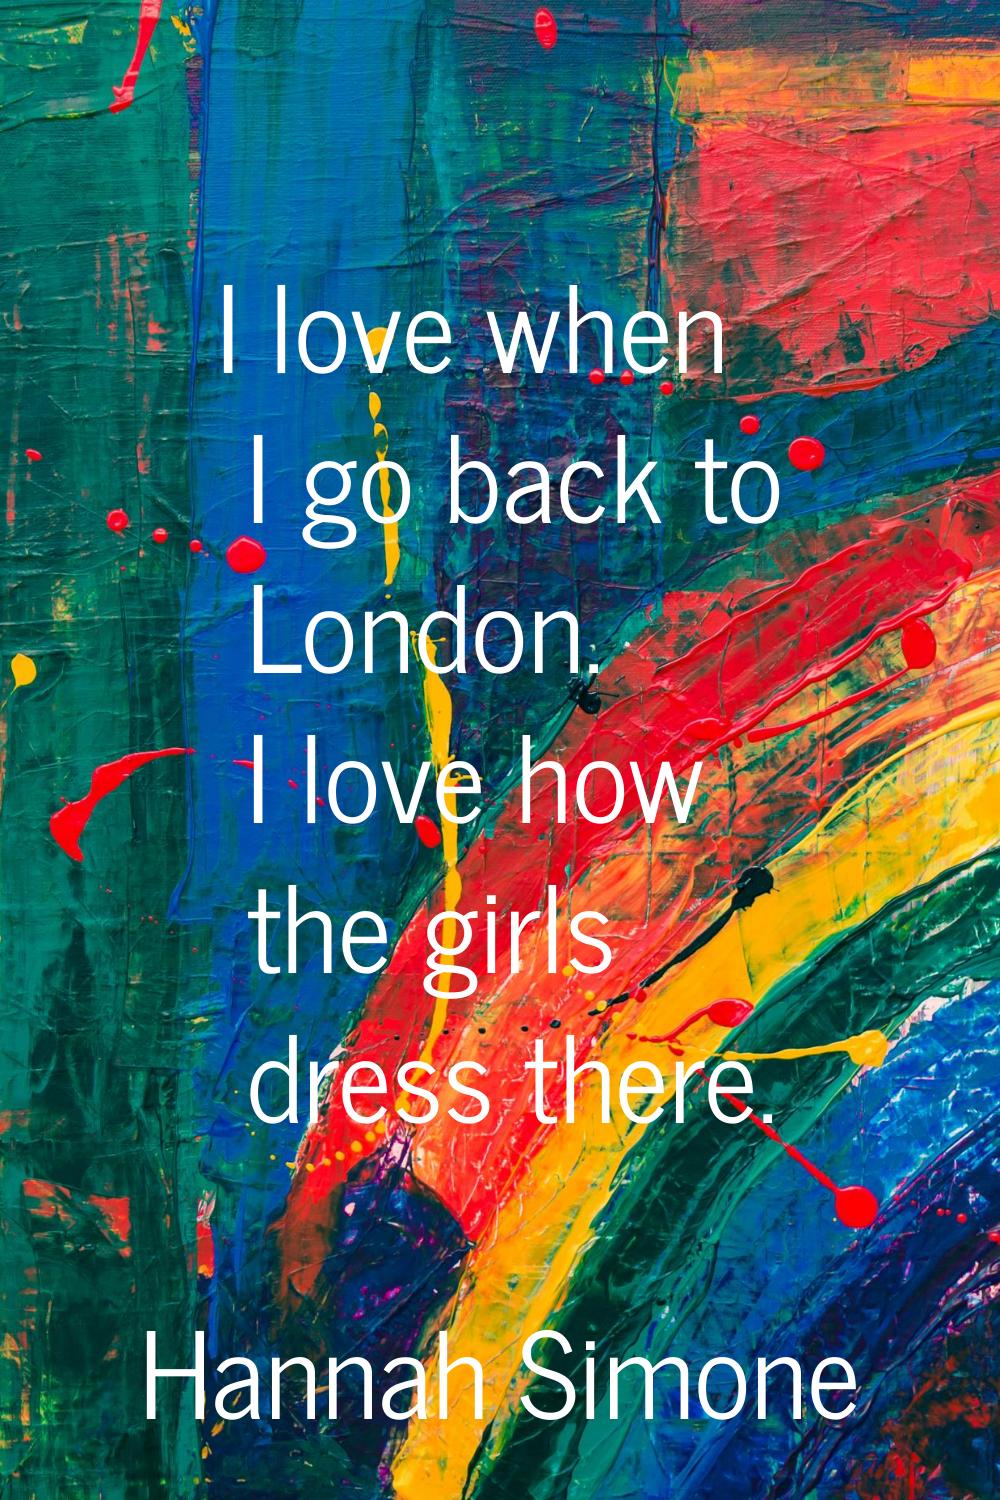 I love when I go back to London. I love how the girls dress there.